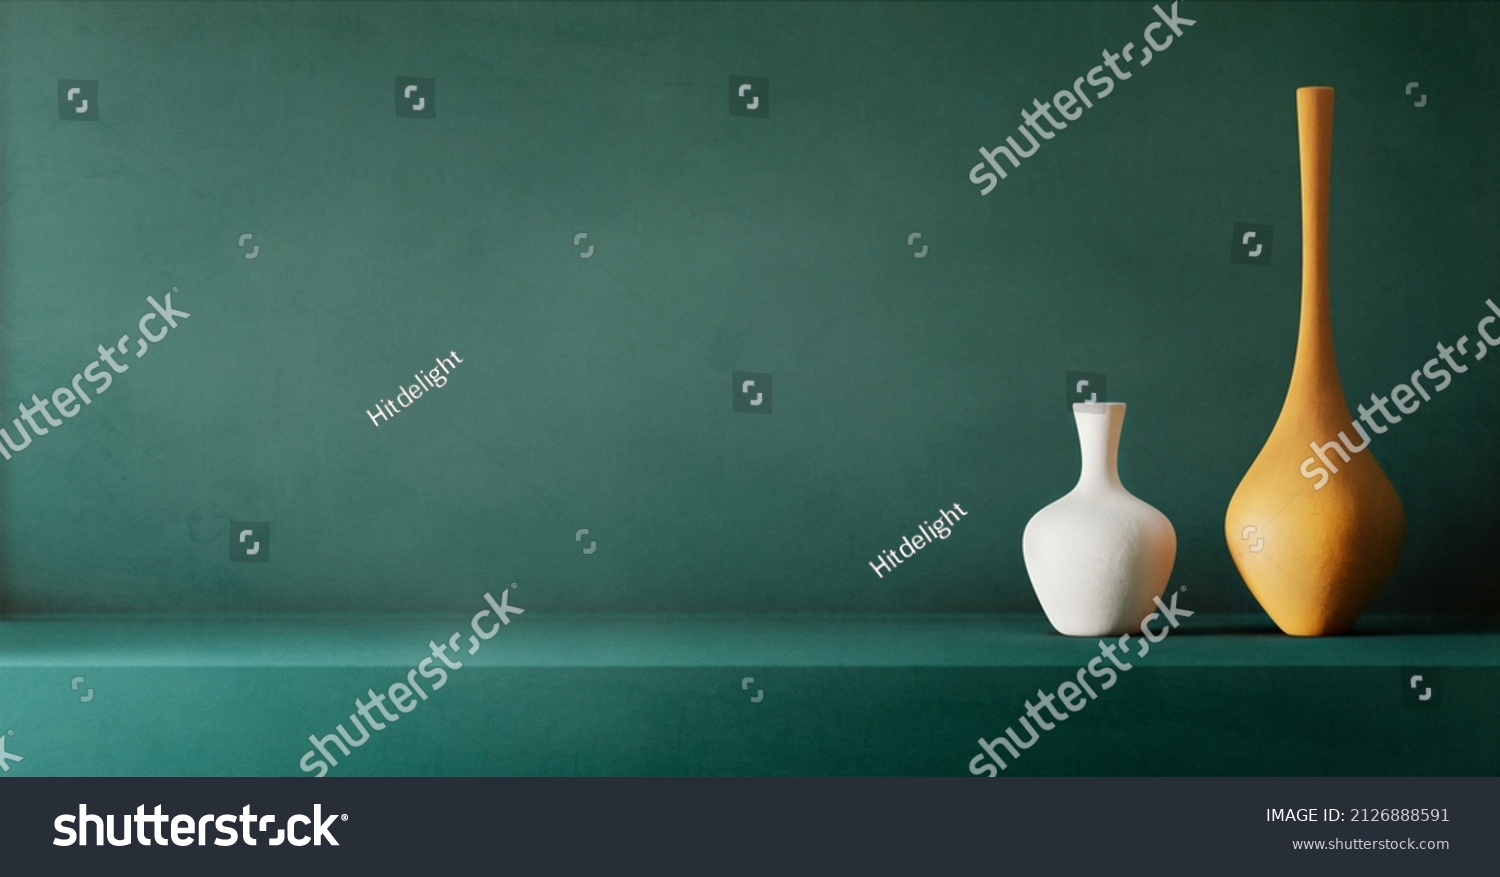 Minimal interion design with ceramic vases on teal plaster texture wall. Product placement showroom with neutral home decor. Home architecture background with neutral aesthetic.  #2126888591